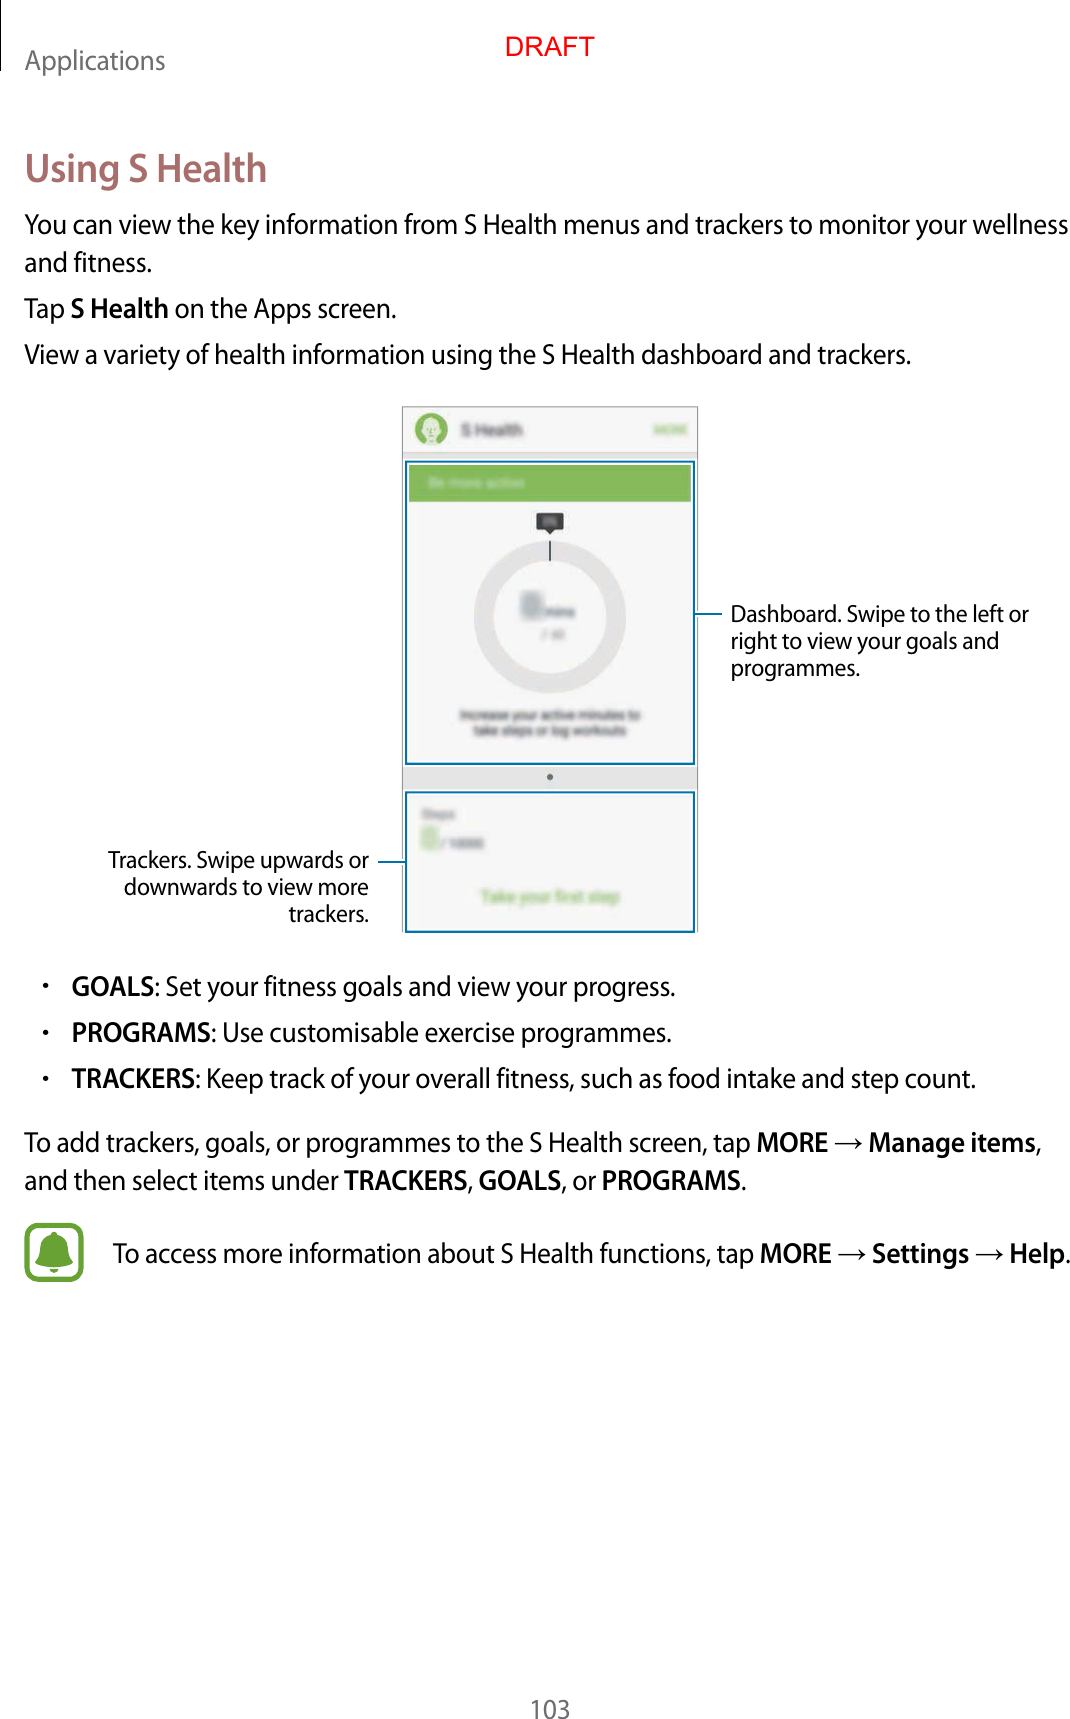 Applications103Using S HealthYou can view the key information from S Health menus and trackers t o monitor y our w ellness and fitness.Tap S Health on the Apps screen.View a v ariety of health information using the S Health dashboar d and trackers .Trackers. S wipe upw ar ds or downw ar ds to view mor e trackers.Dashboard. S wipe t o the left or right to view your goals and programmes.•GOALS: Set your fitness goals and view your pr og r ess .•PROGRAMS: Use customisable exercise progr ammes .•TRACKERS: Keep track of your o v erall fitness, such as food intake and step c ount.To add trackers, goals , or pr og r ammes to the S Health scr een, tap MORE  Manage items, and then select items under TRACKERS, GOALS, or PROGRAMS.To access mor e inf ormation about S Health functions, tap MORE  Settings  Help.DRAFT